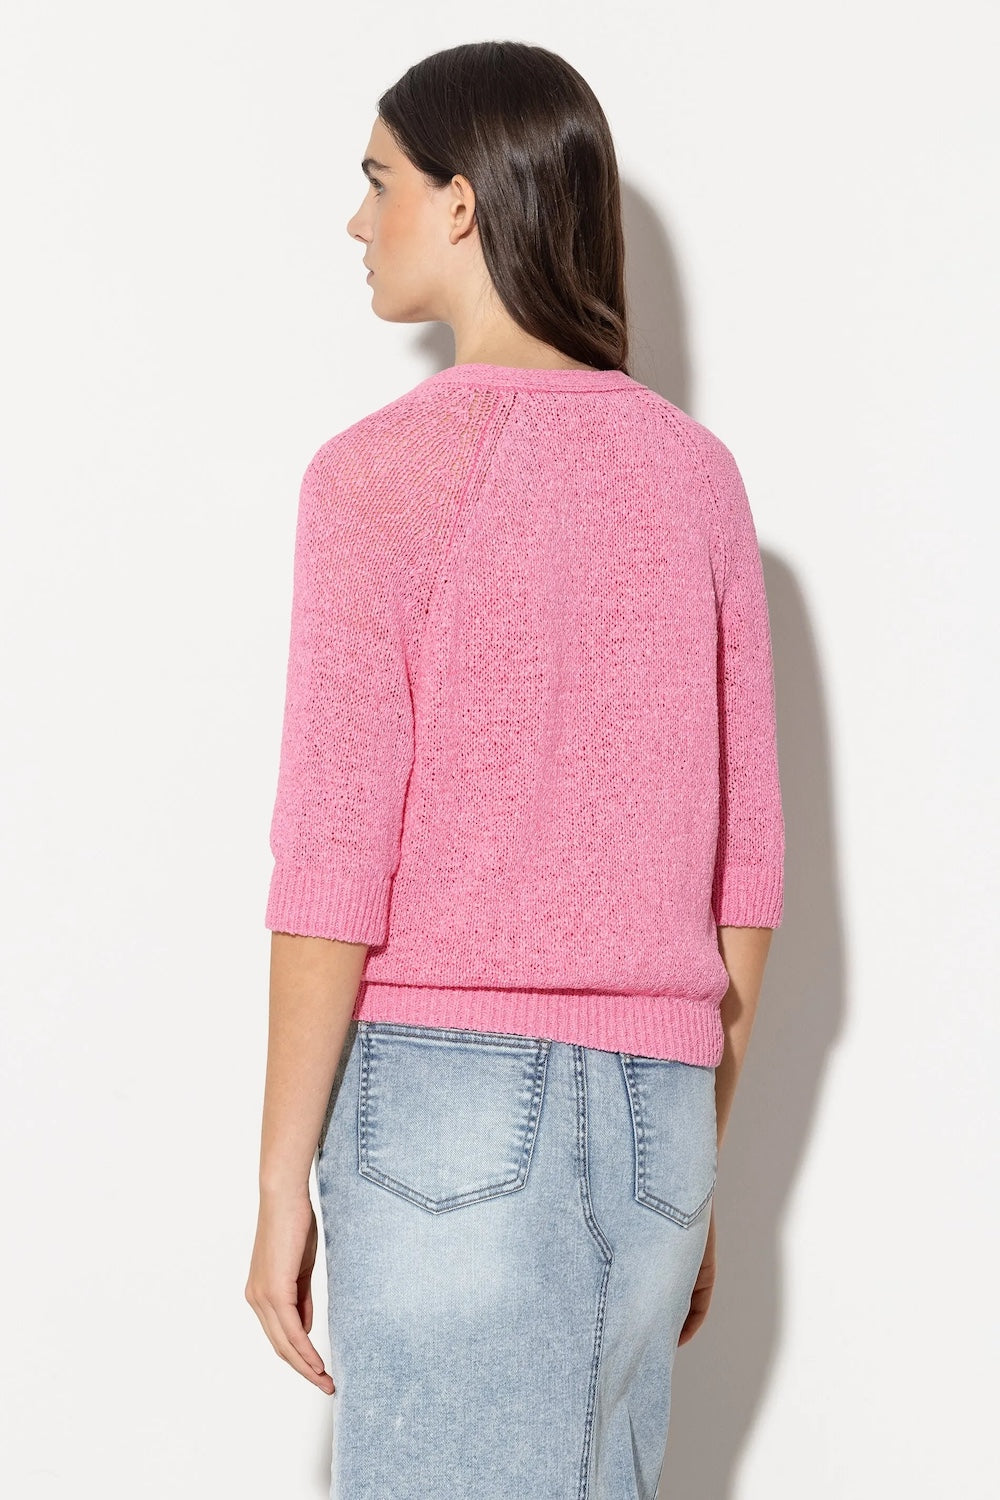 Candy Pink Short Sleeved Cardigan